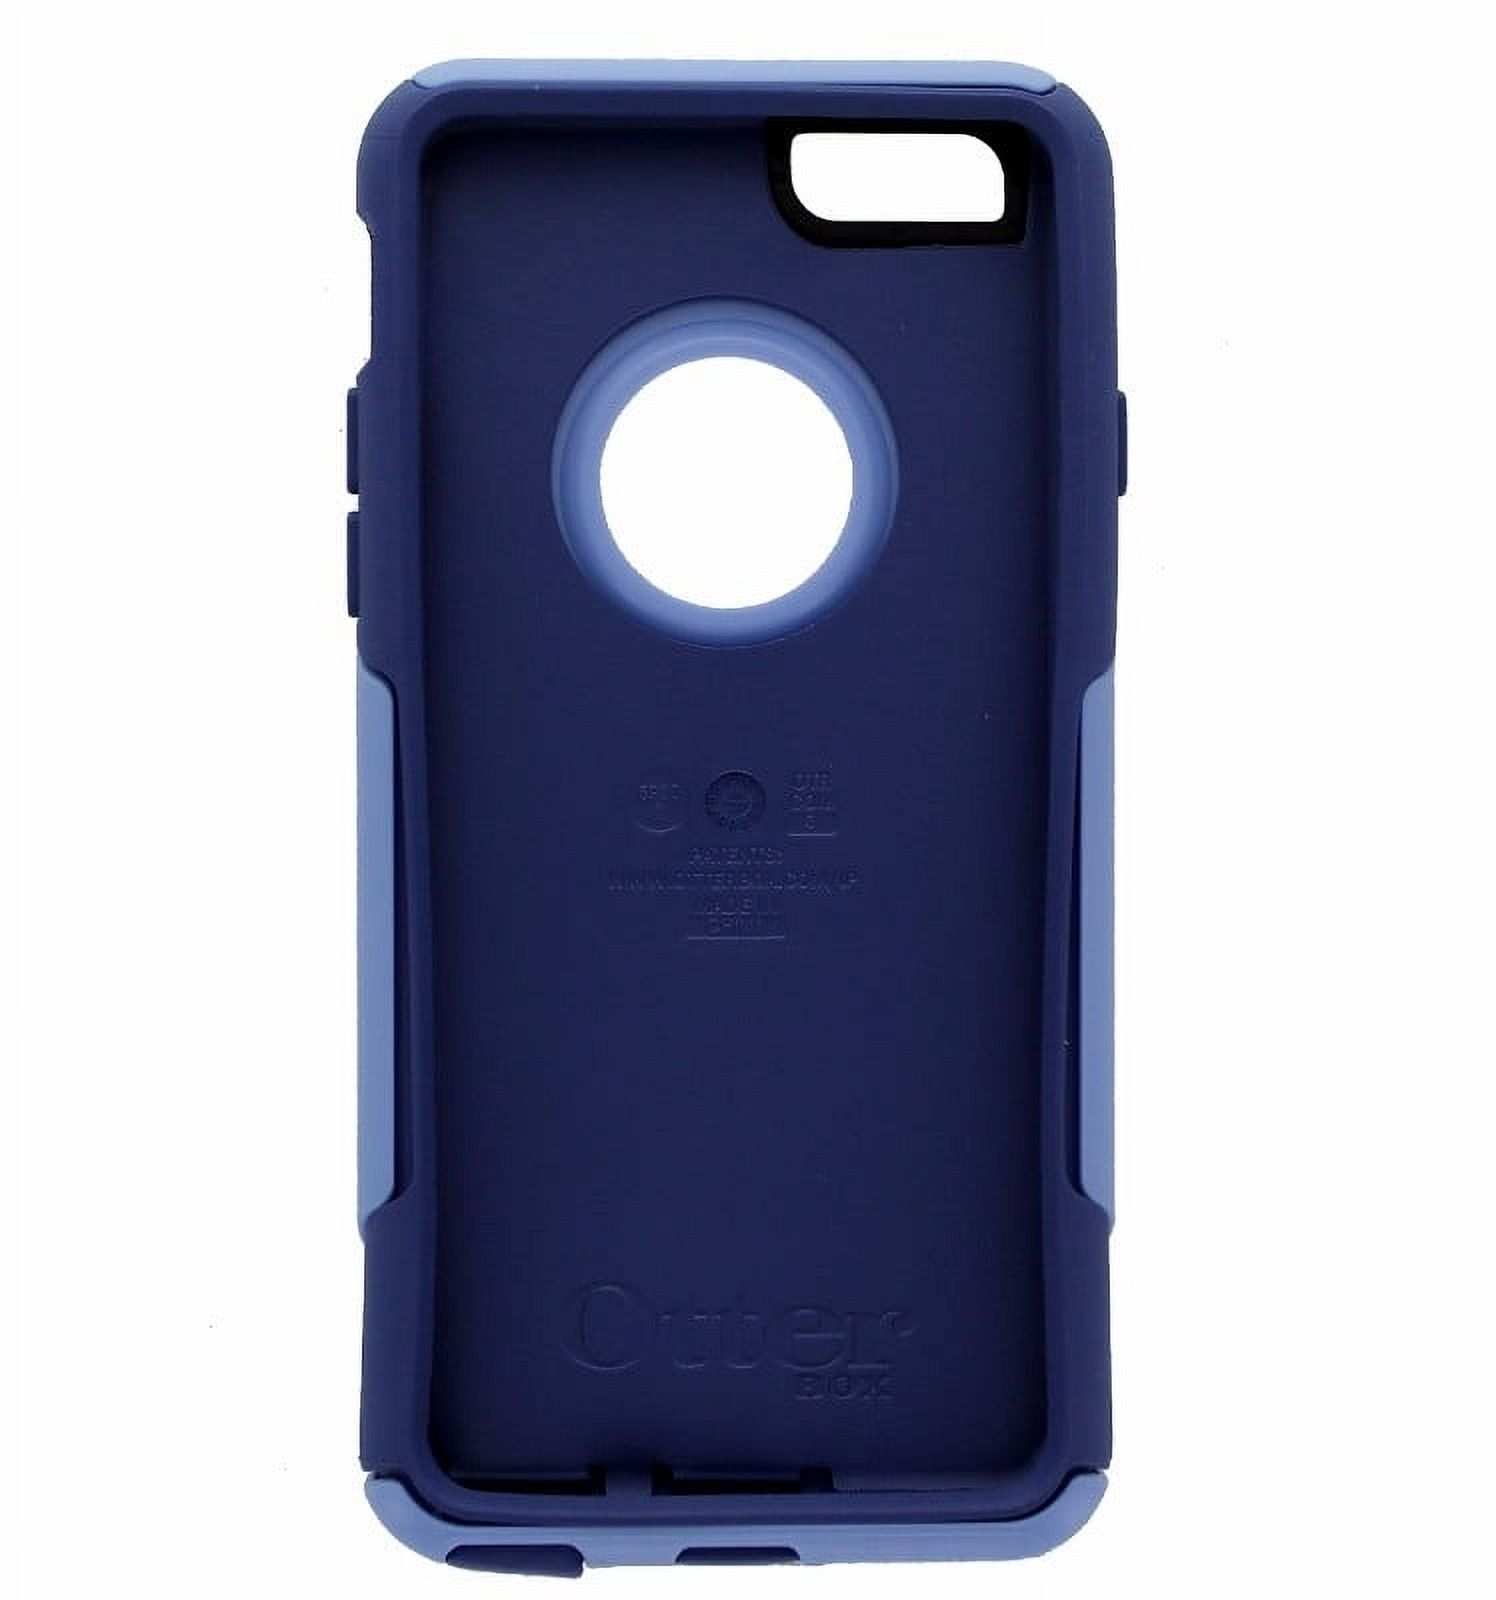 OtterBox Commuter Case for Apple iPhone 6 4.7 inch - Purple *Cover OEM Original (Used) - image 2 of 2